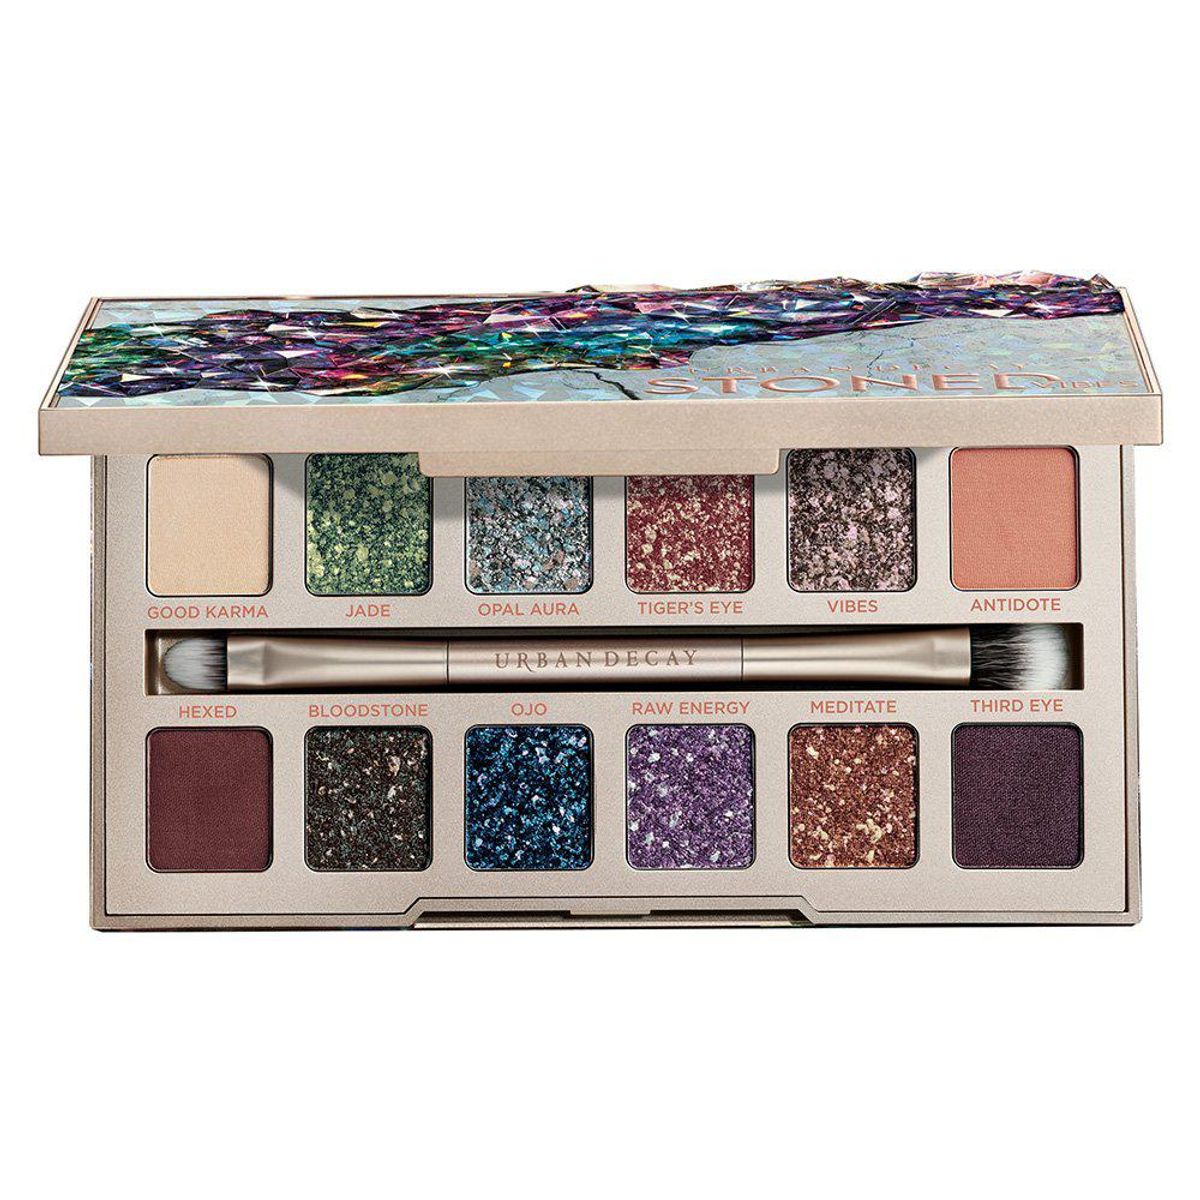 Stoned Vibes Eyeshadow Palette